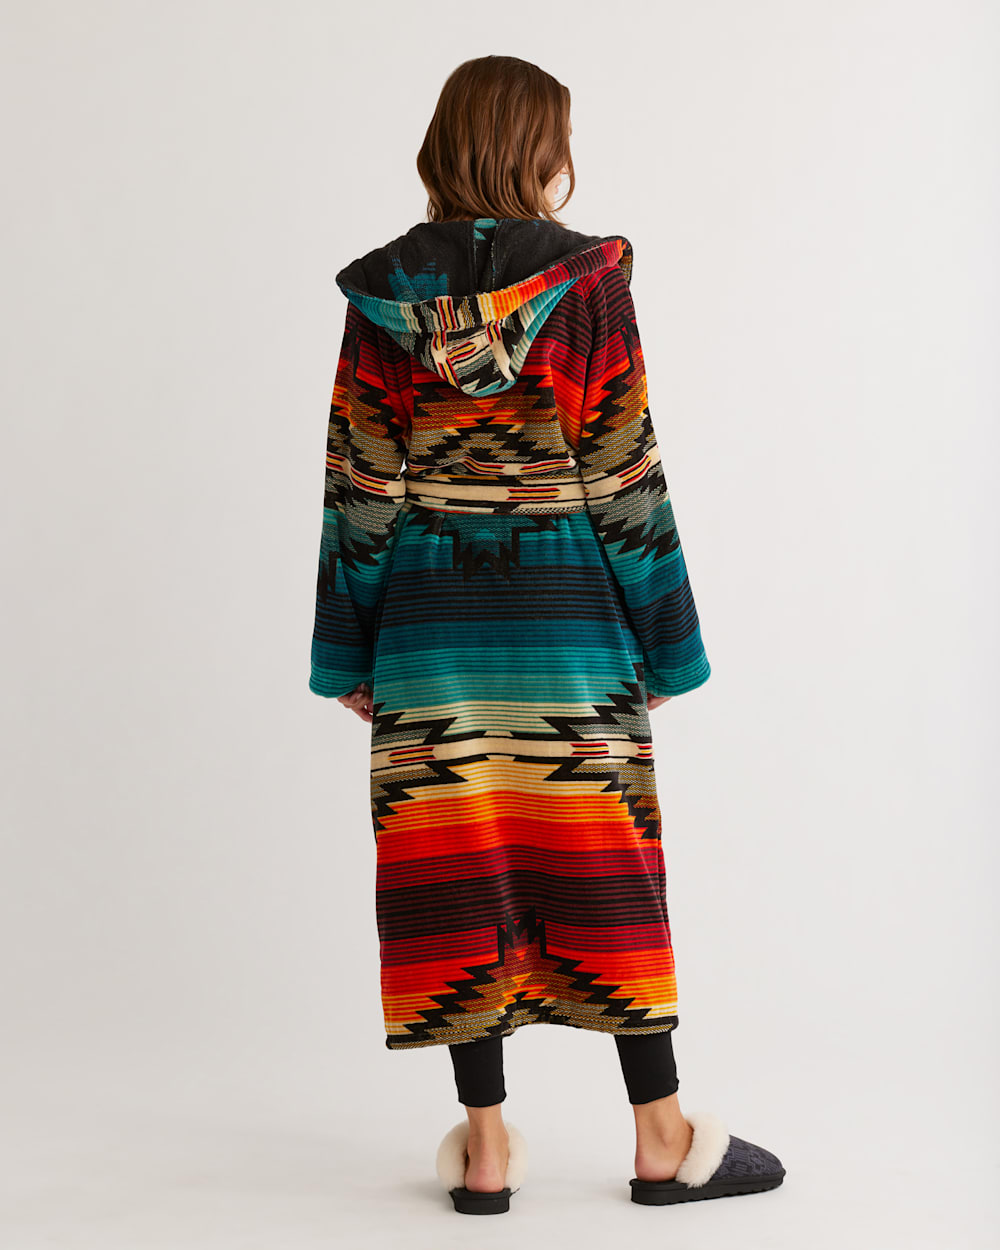 ALTERNATE VIEW OF UNISEX COTTON TERRY VELOUR ROBE IN SALTILLO SUNSET image number 4